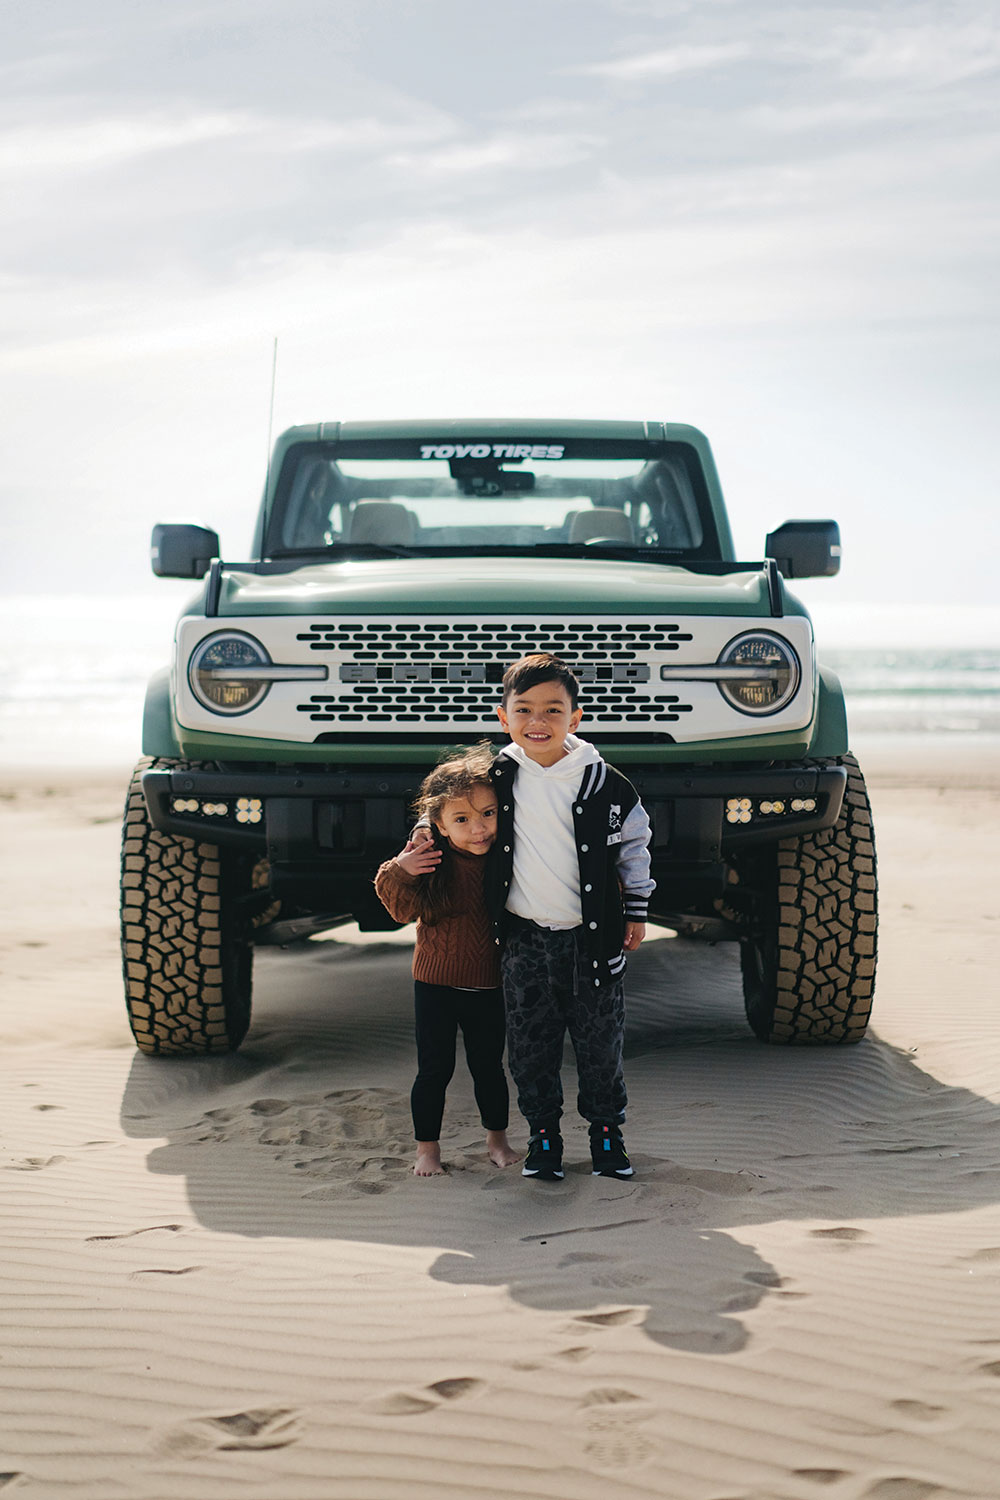 Two small children stand arm in arm in front of the Bronco.